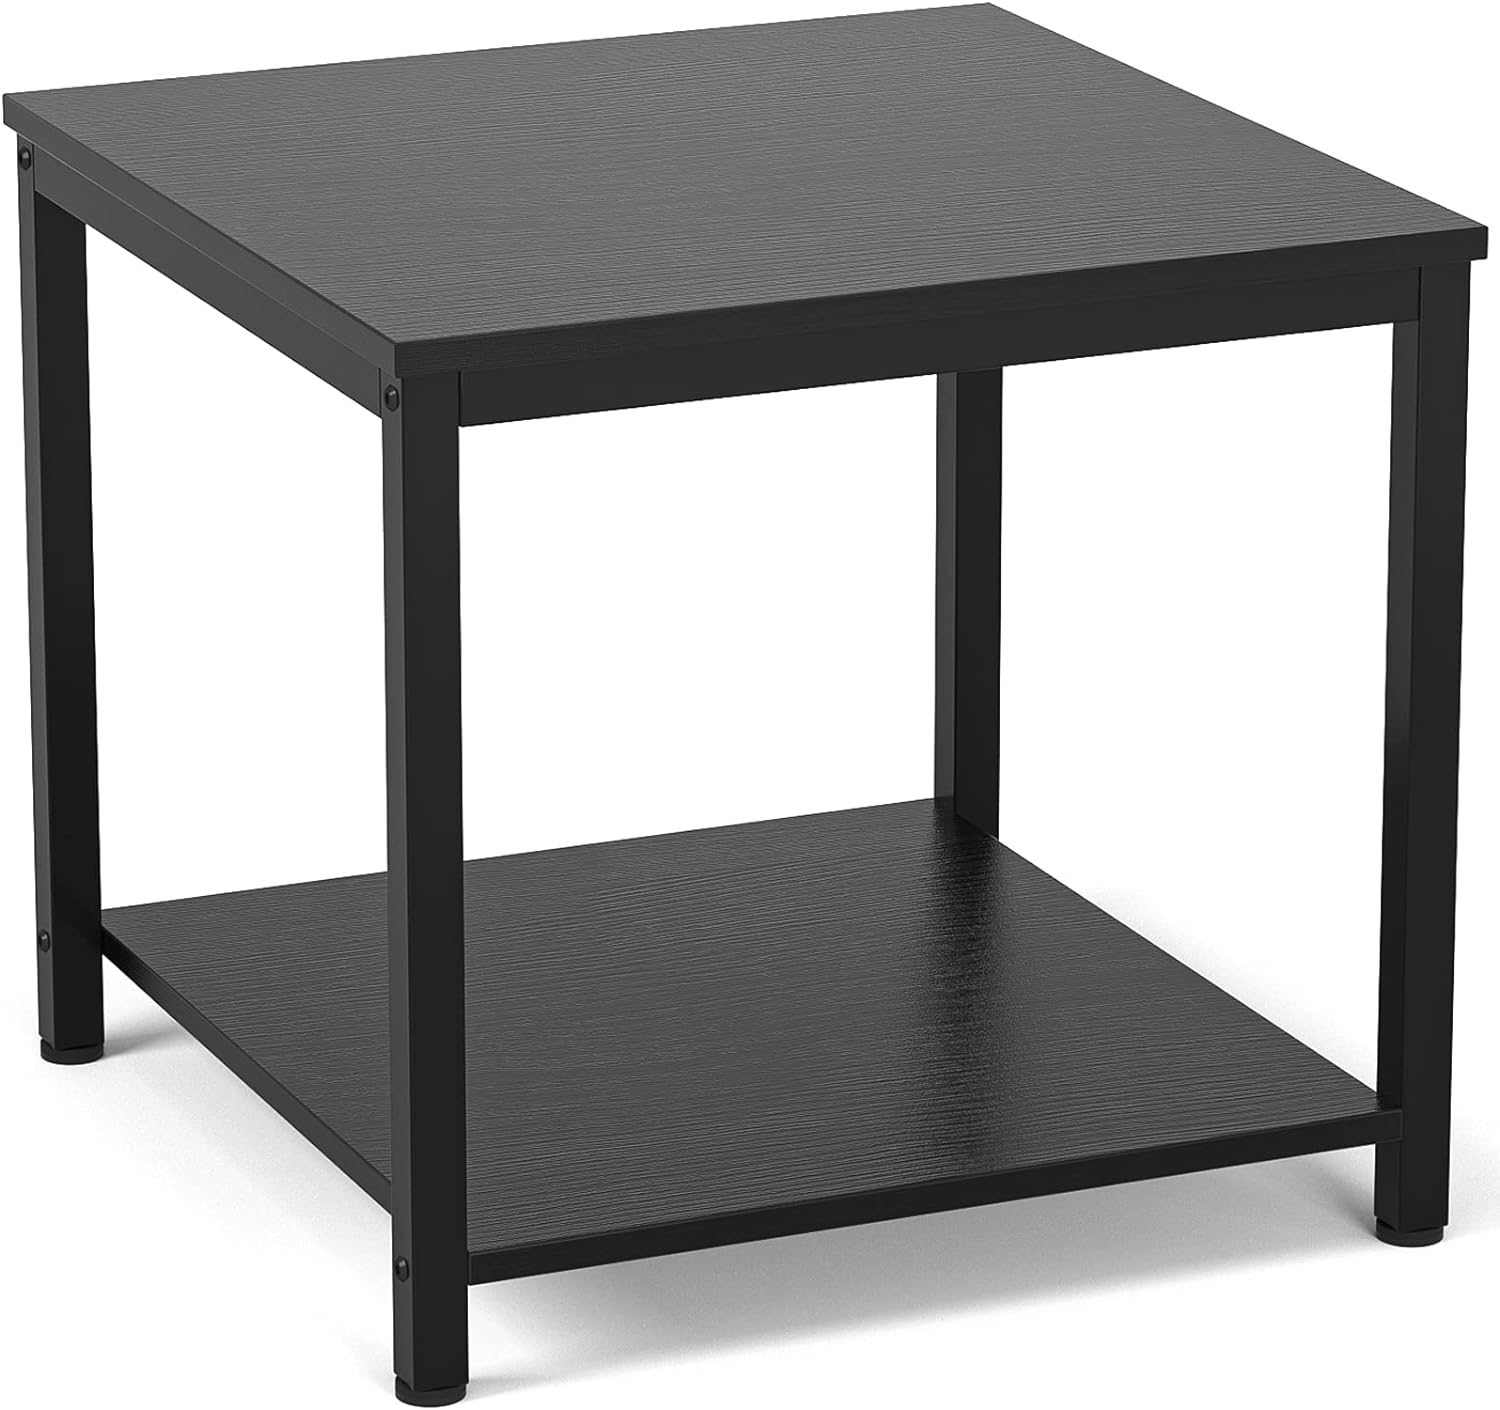 Homieasy Side Table 20 Inch Square, 2-Tier Coffee Tea End Table Nightstands for Sofa Couch Bed, Metal Wood Accent Modern Simple Industrial Style Side Table for Living Room Bedroom, Black